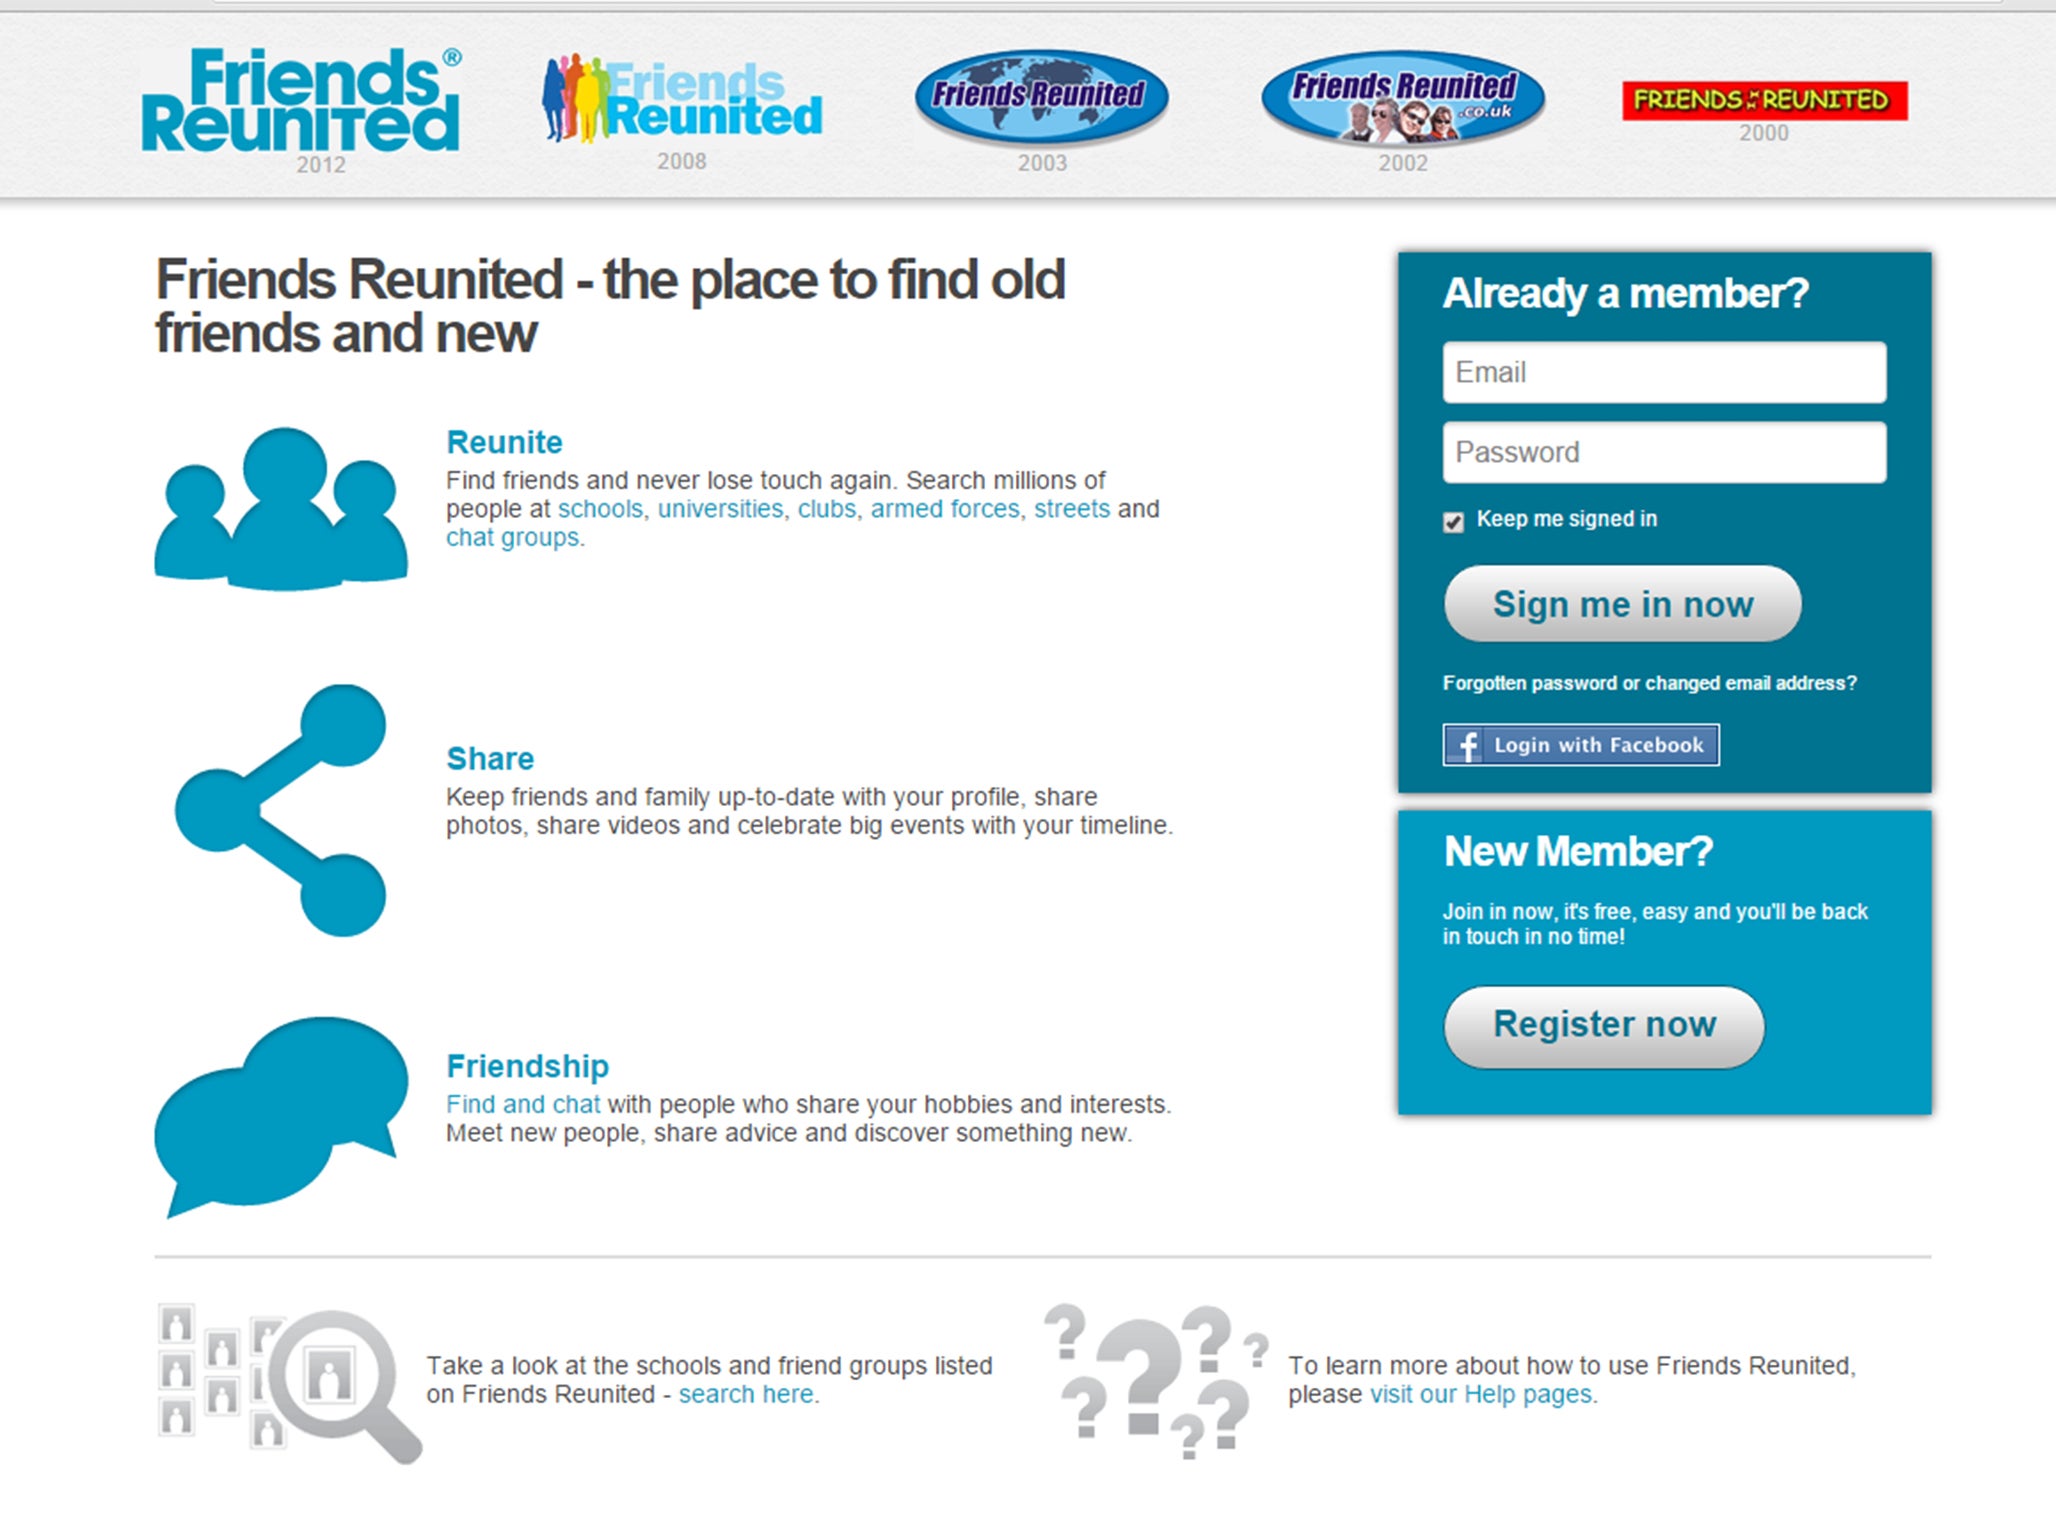 The Friends Reunited site, which is still online for now